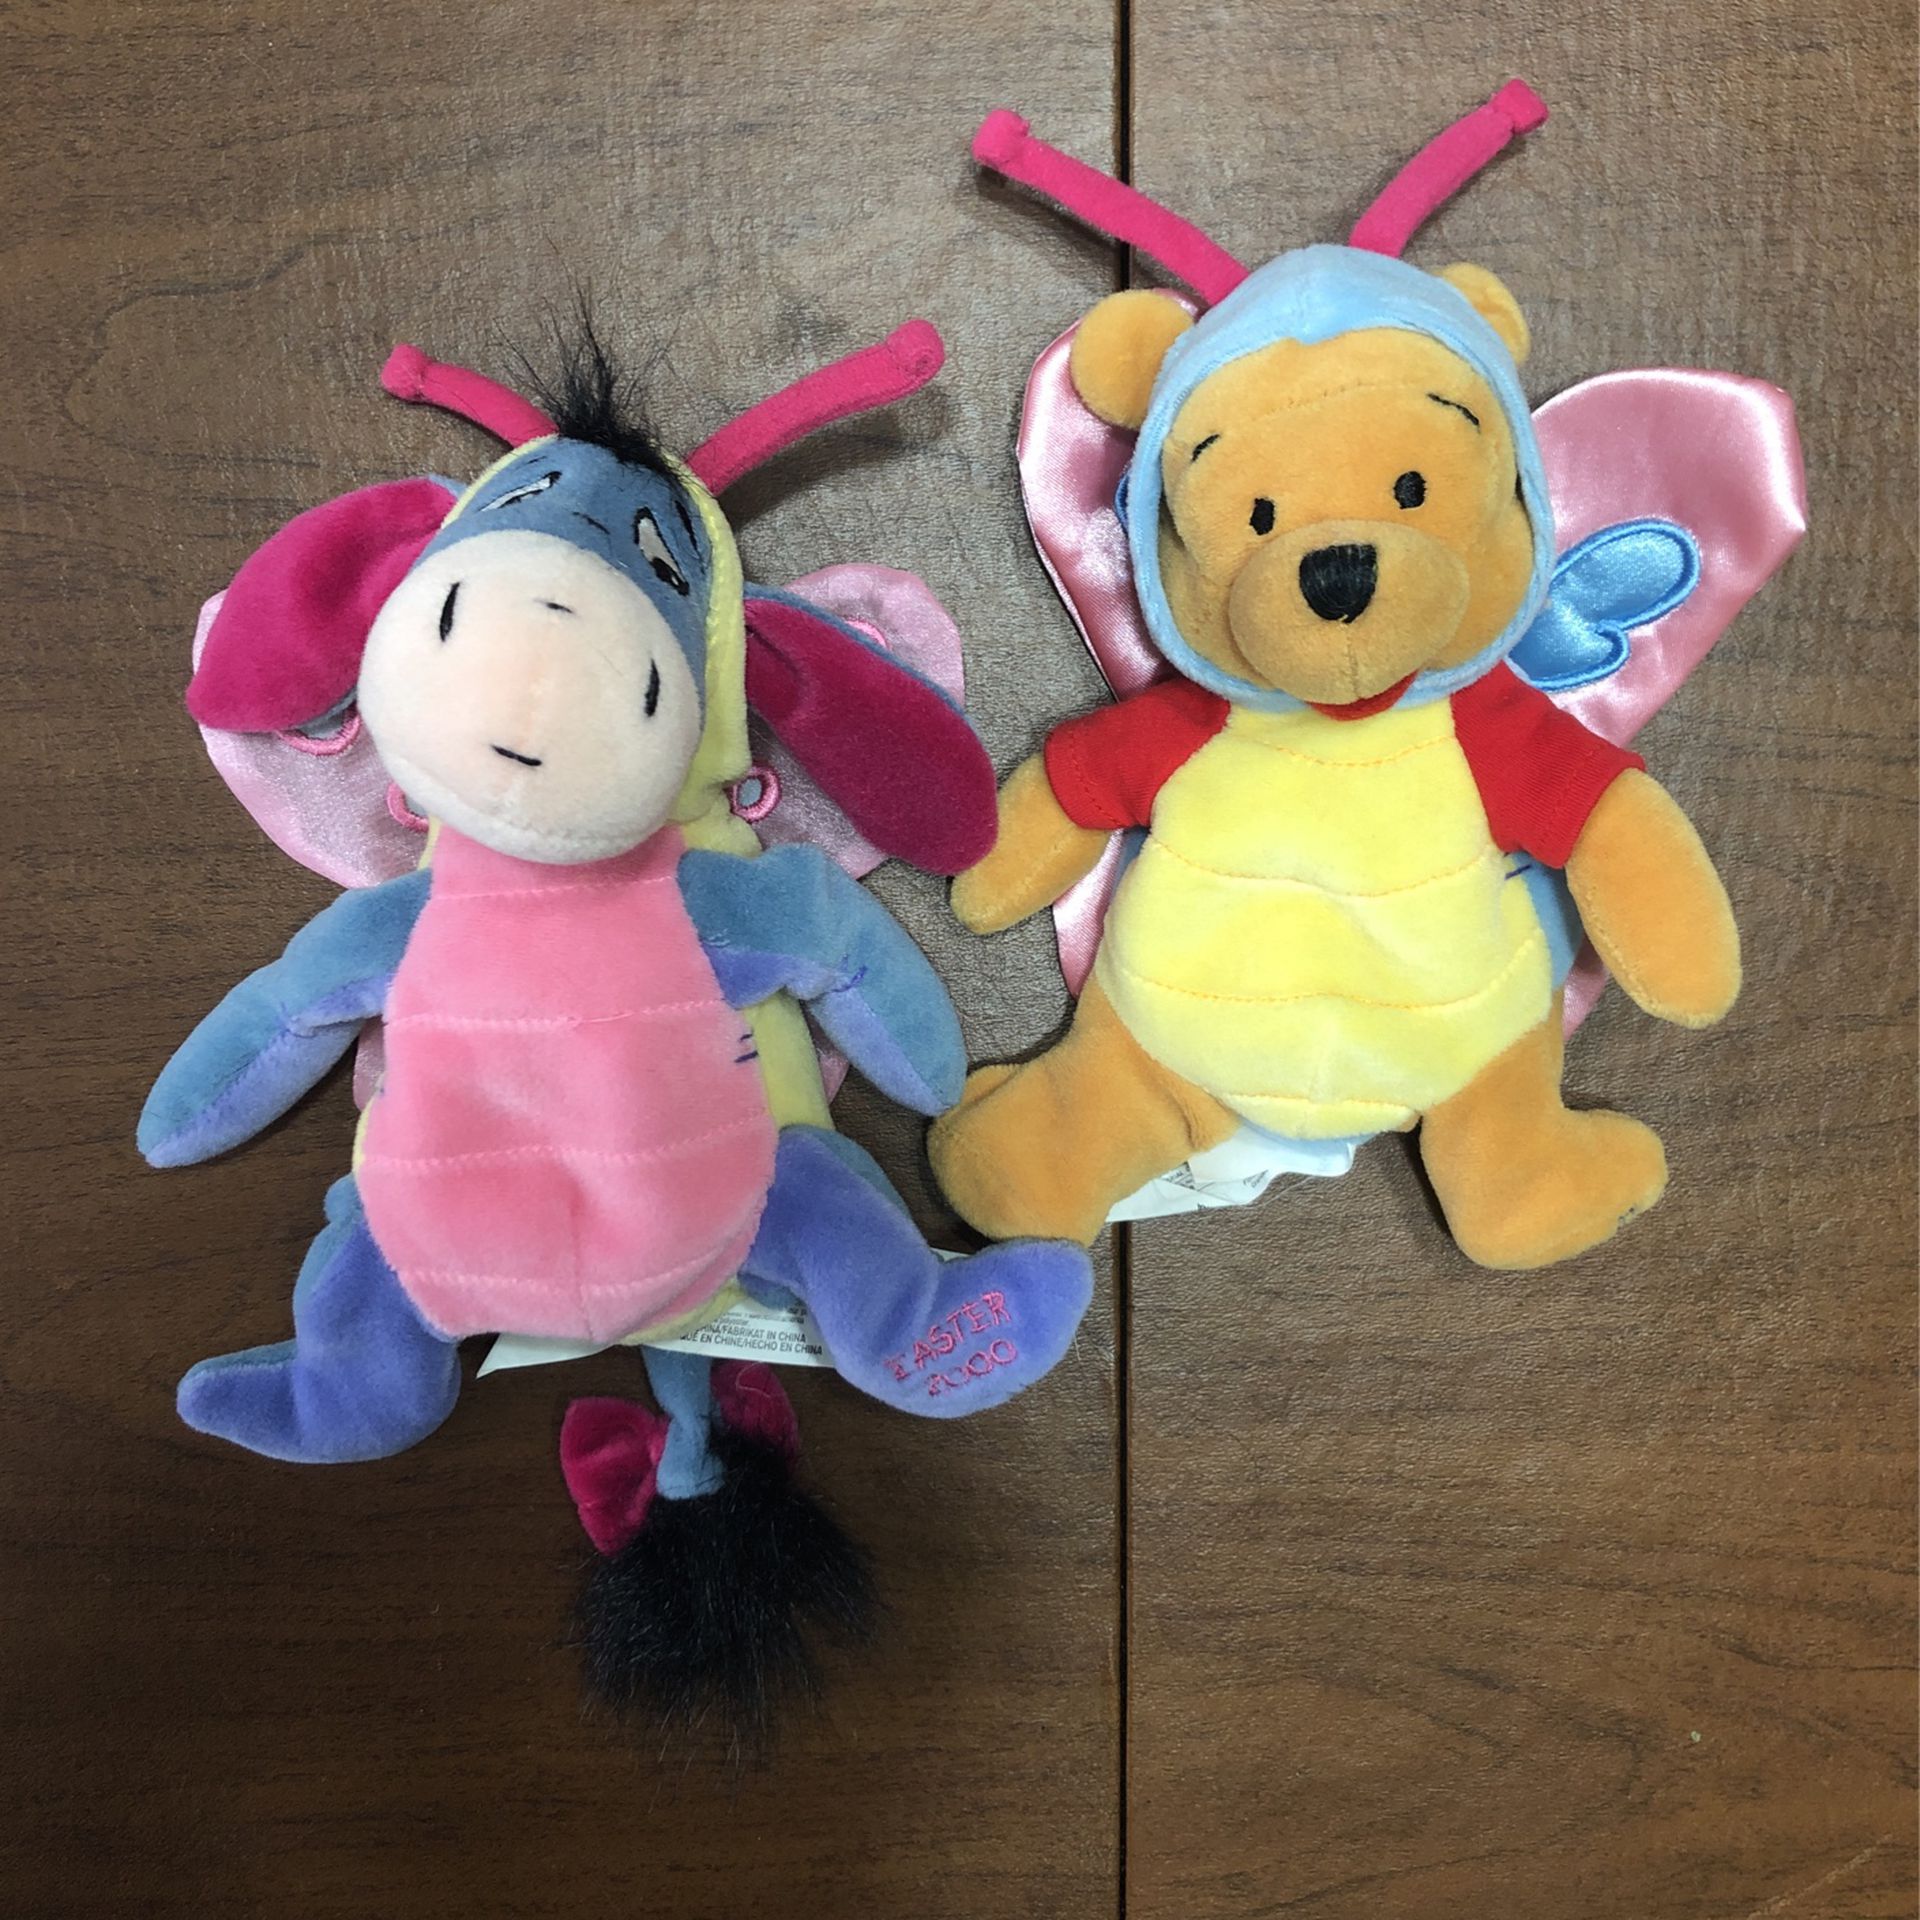 Disney Plush Beanies Winnie The Pooh And Eeyore Limited Edition Easter 2000